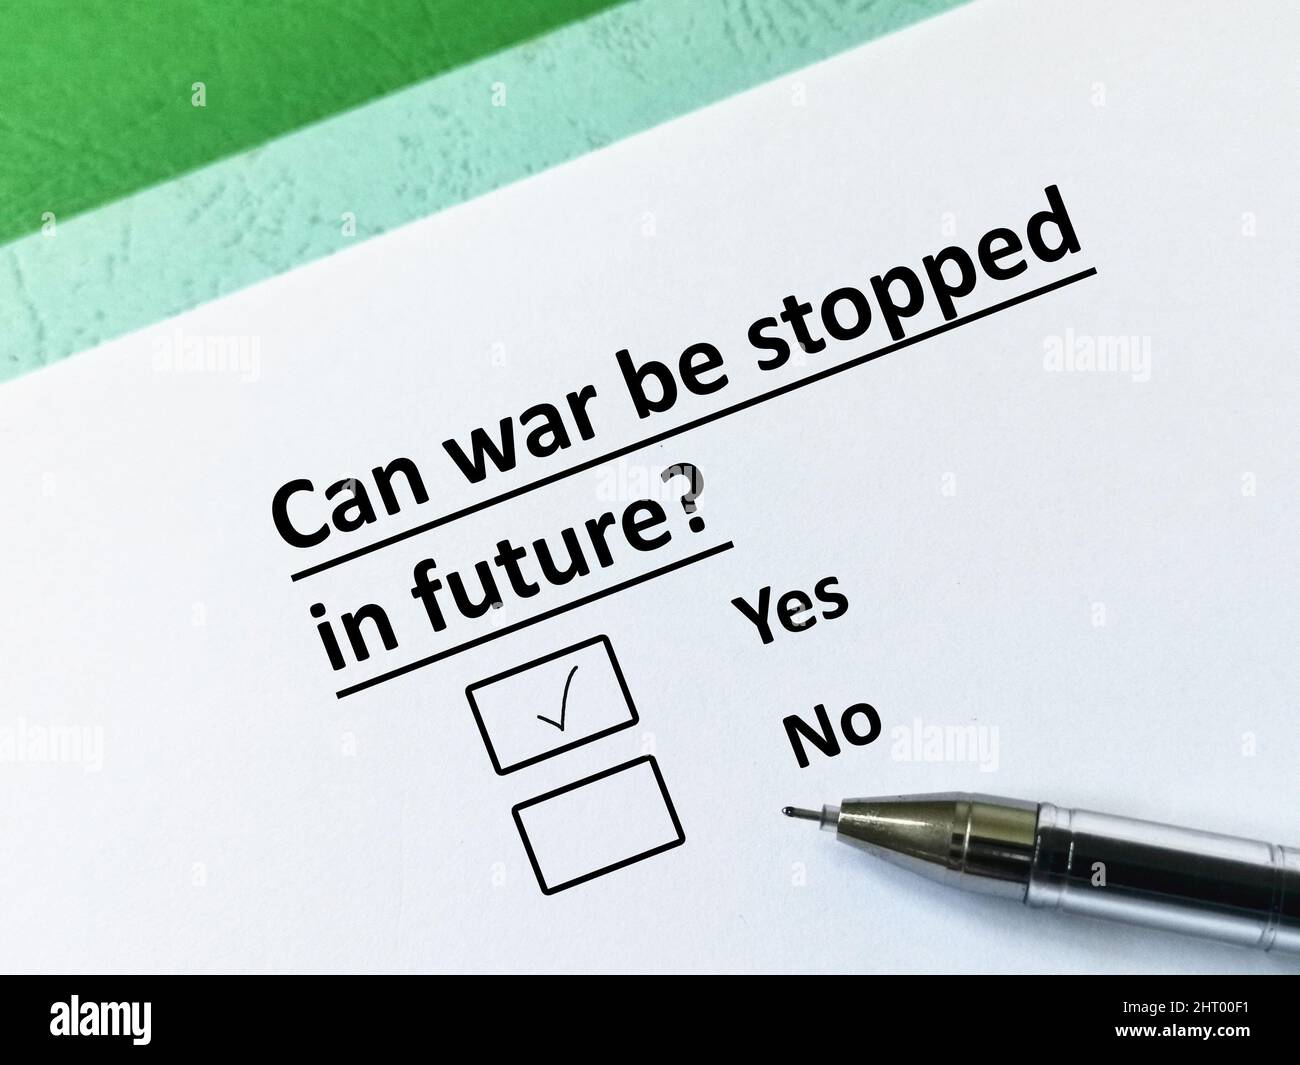 One person is answering question about conflict and war. The person thinks that war can be stopped in future. Stock Photo